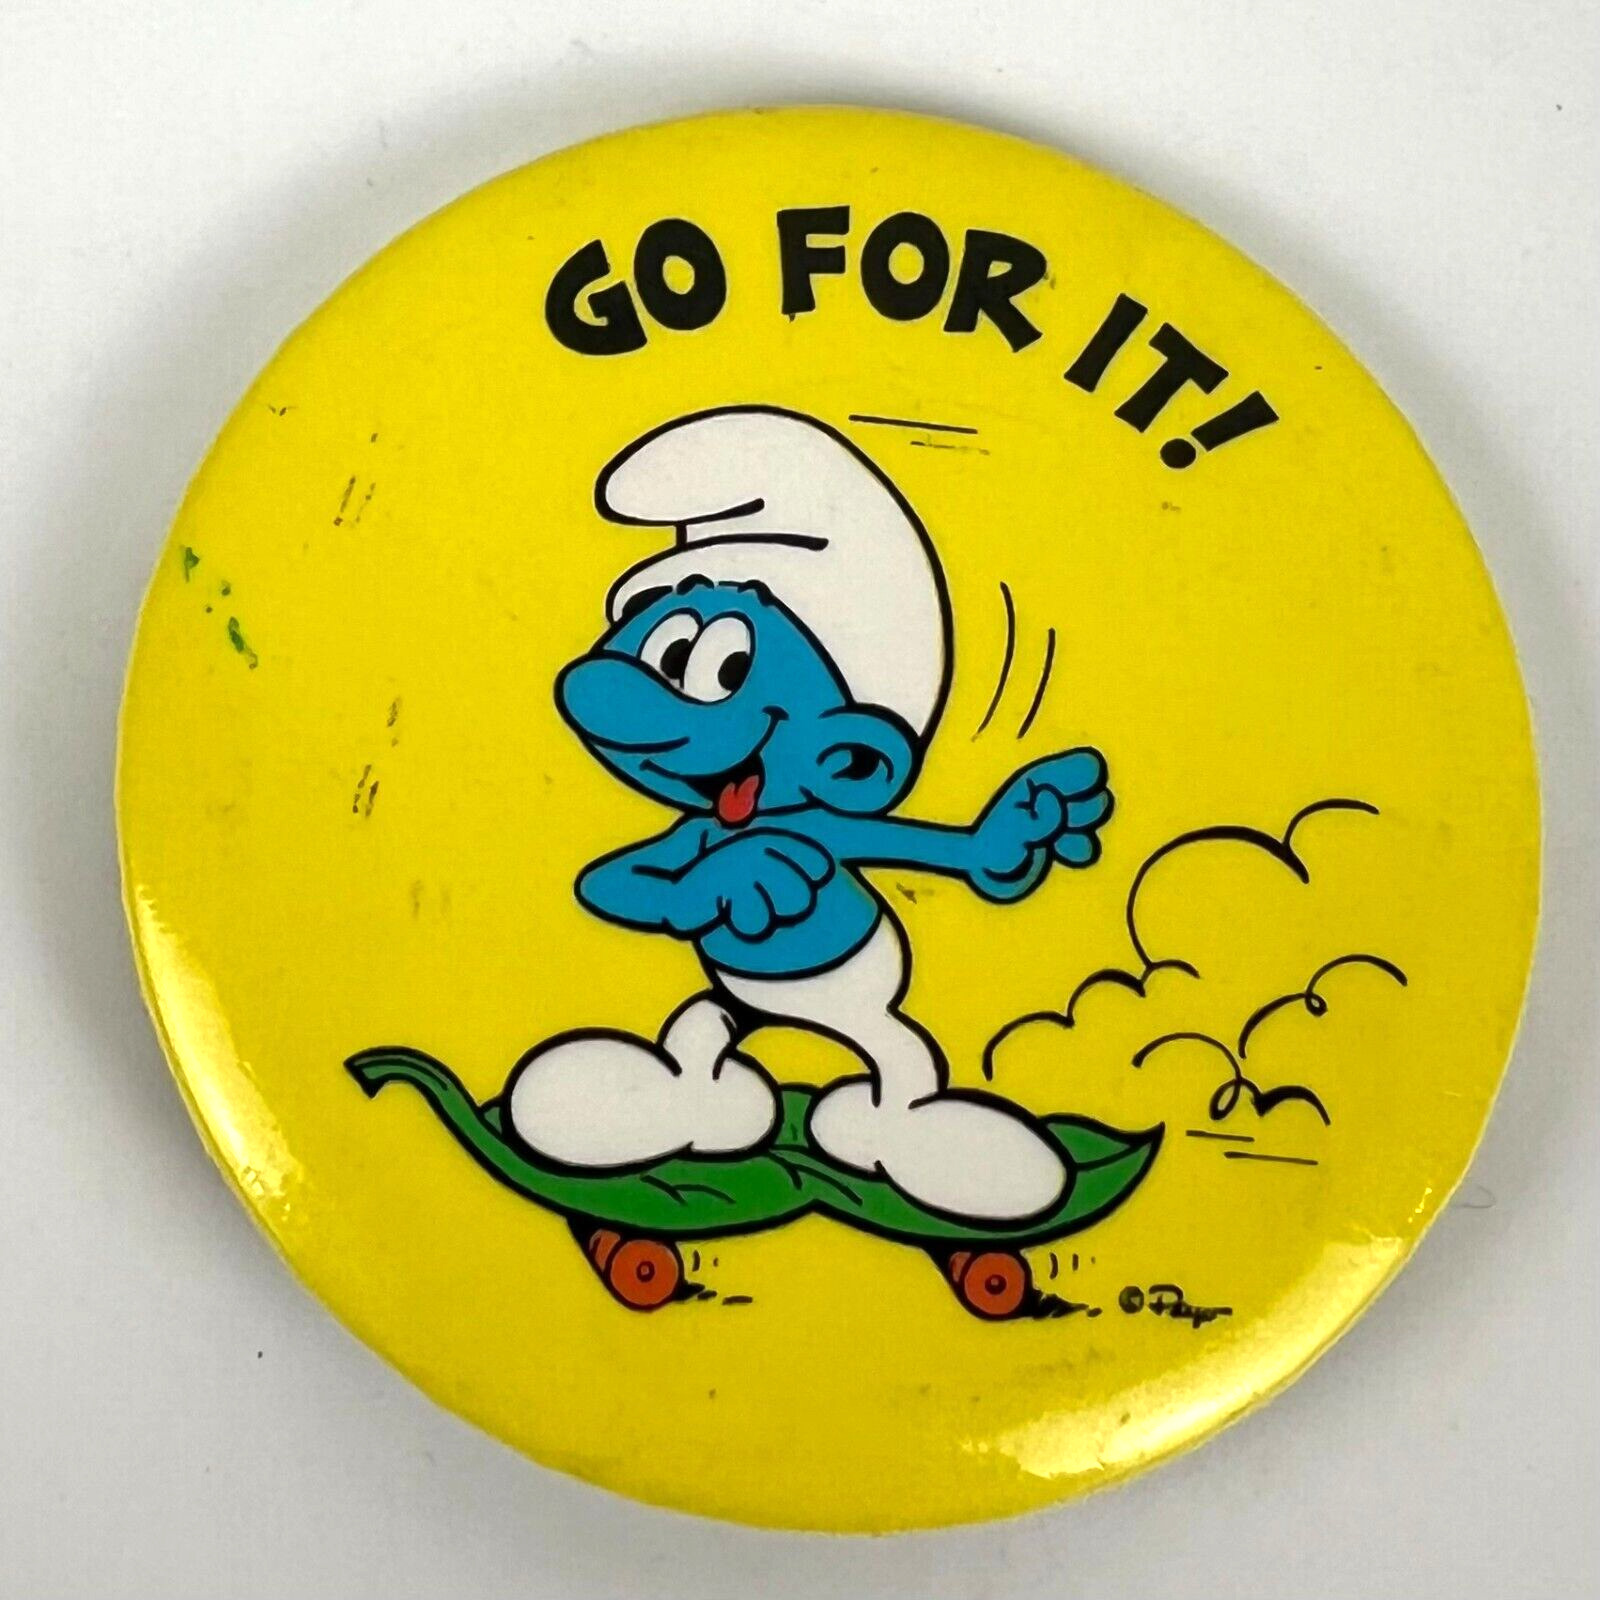 The Smurfs Vintage Pinback Button Advertisement Flair Yellow GO FOR IT